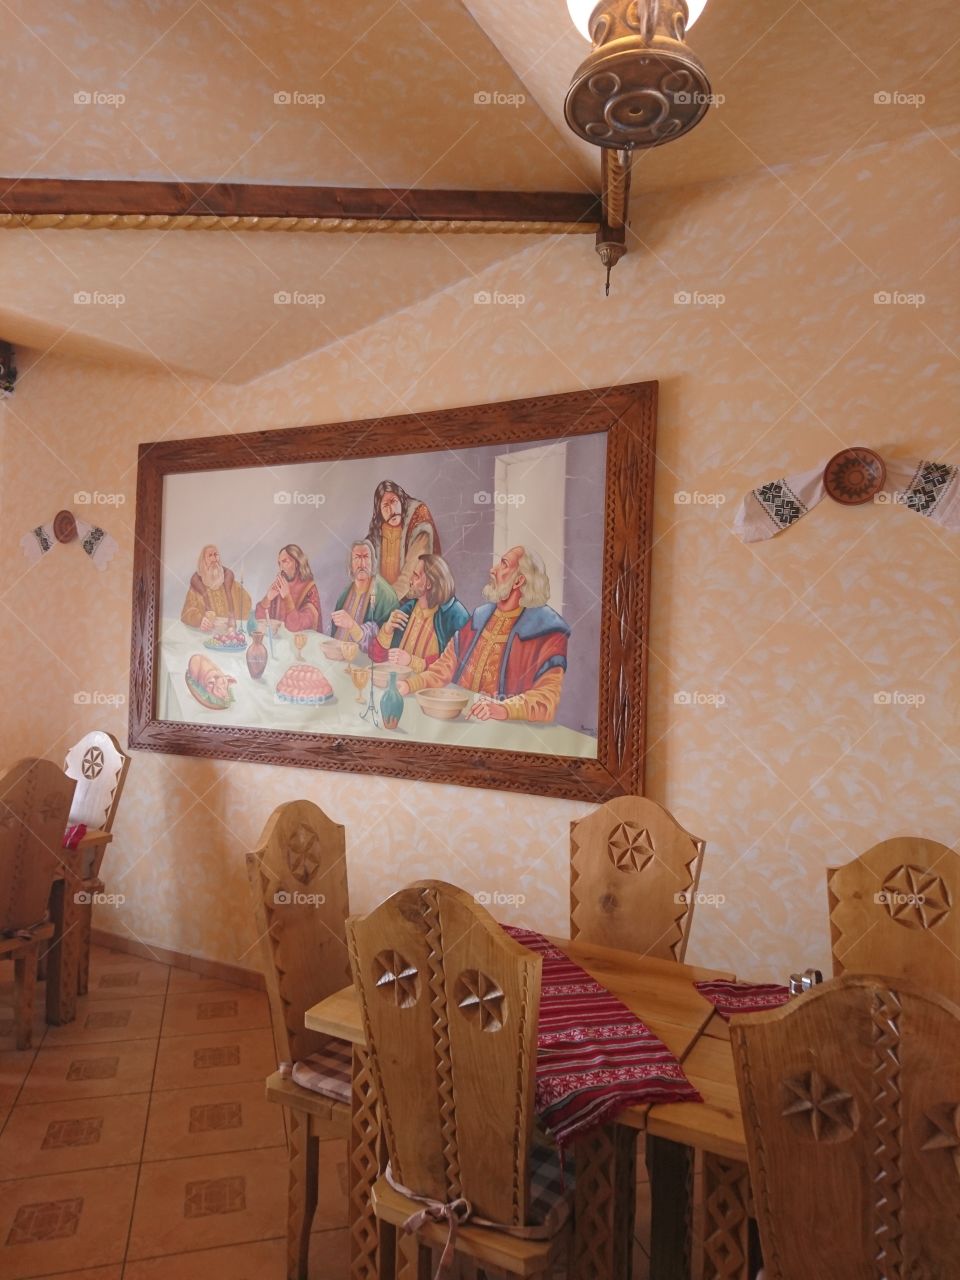 wall painting inside a tradotional romanian restaurant in the mountains